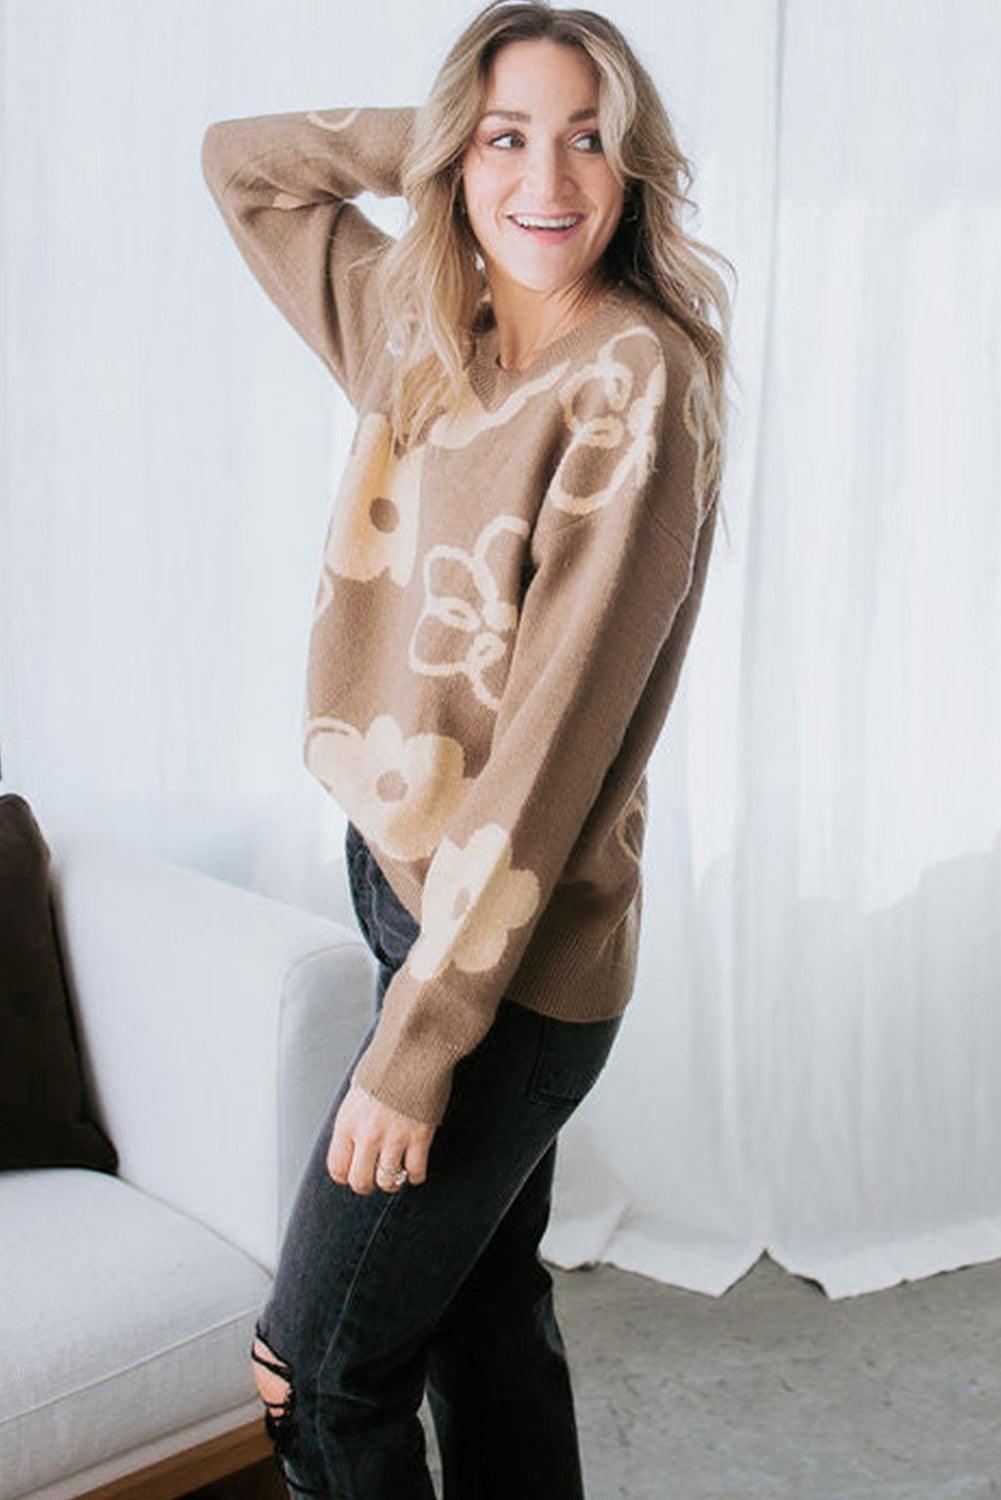 Camel Floral Print Ribbed Contrast Sweater - Ninonine